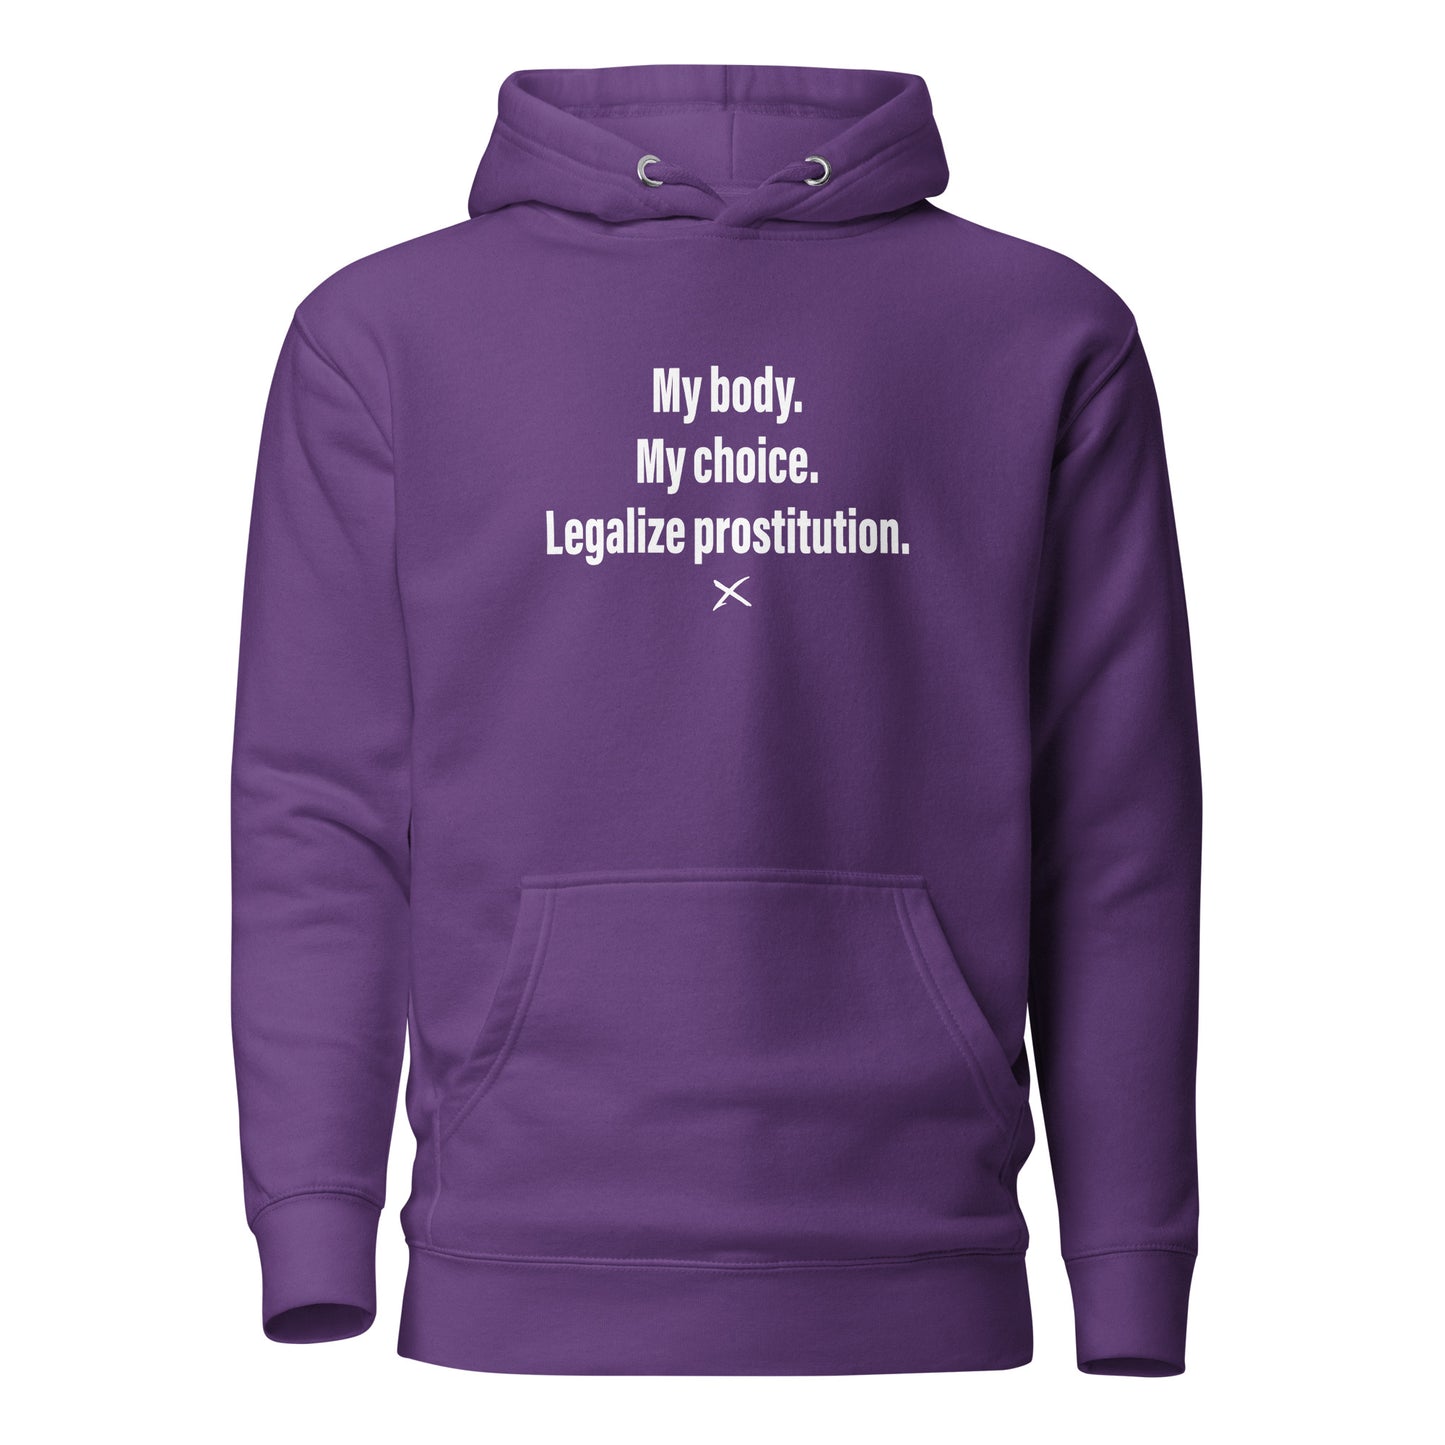 My body. My choice. Legalize prostitution. - Hoodie